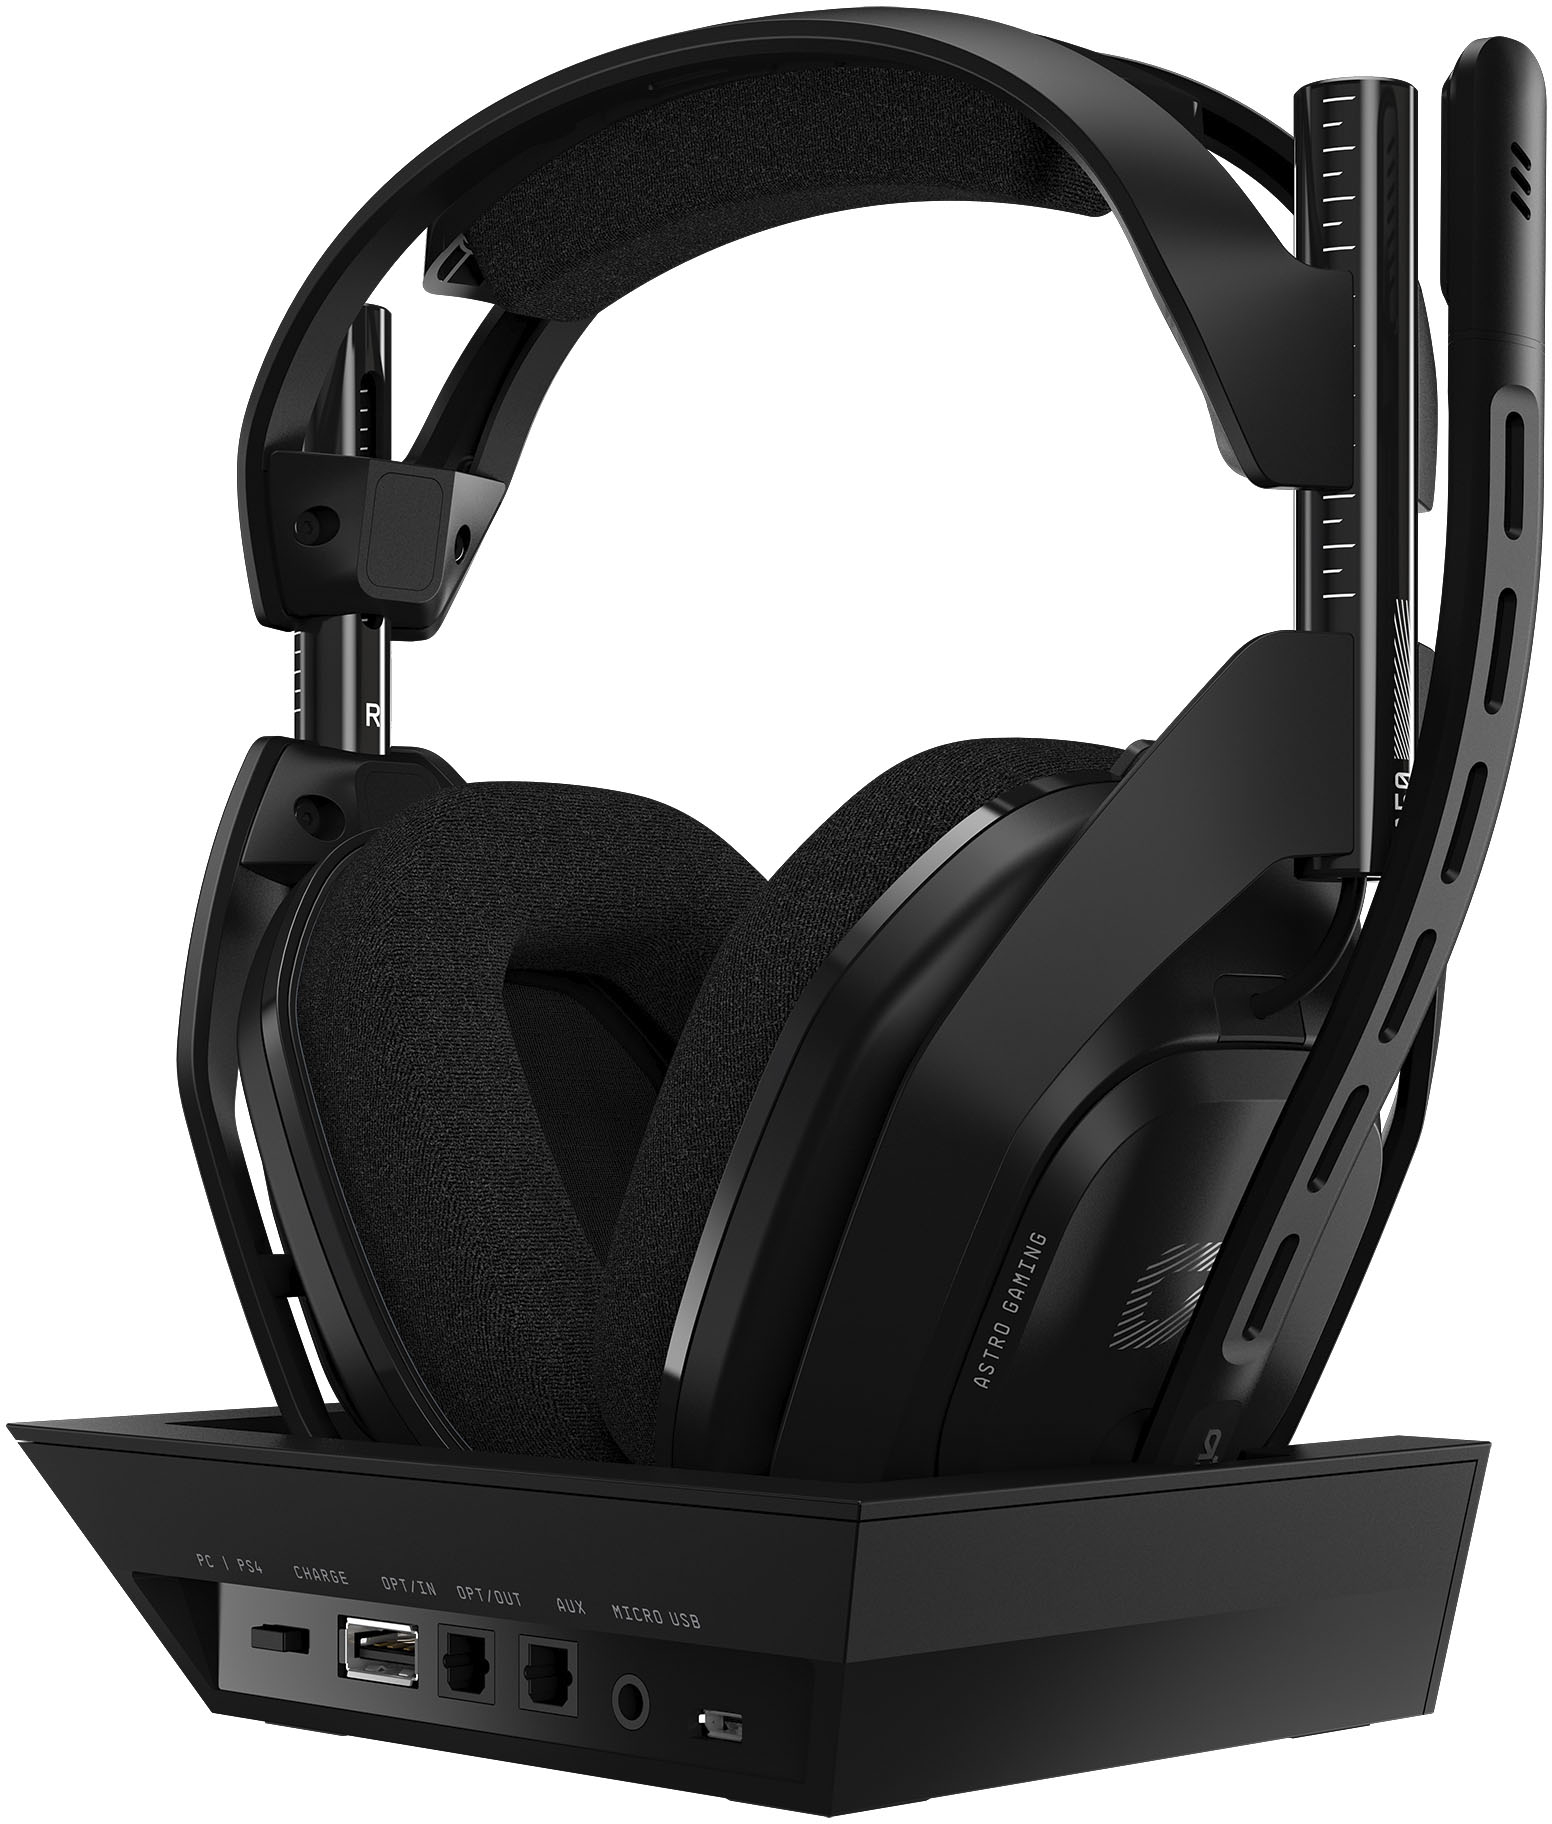 astro a50 headset for sale Off 77% - www.gmcanantnag.net